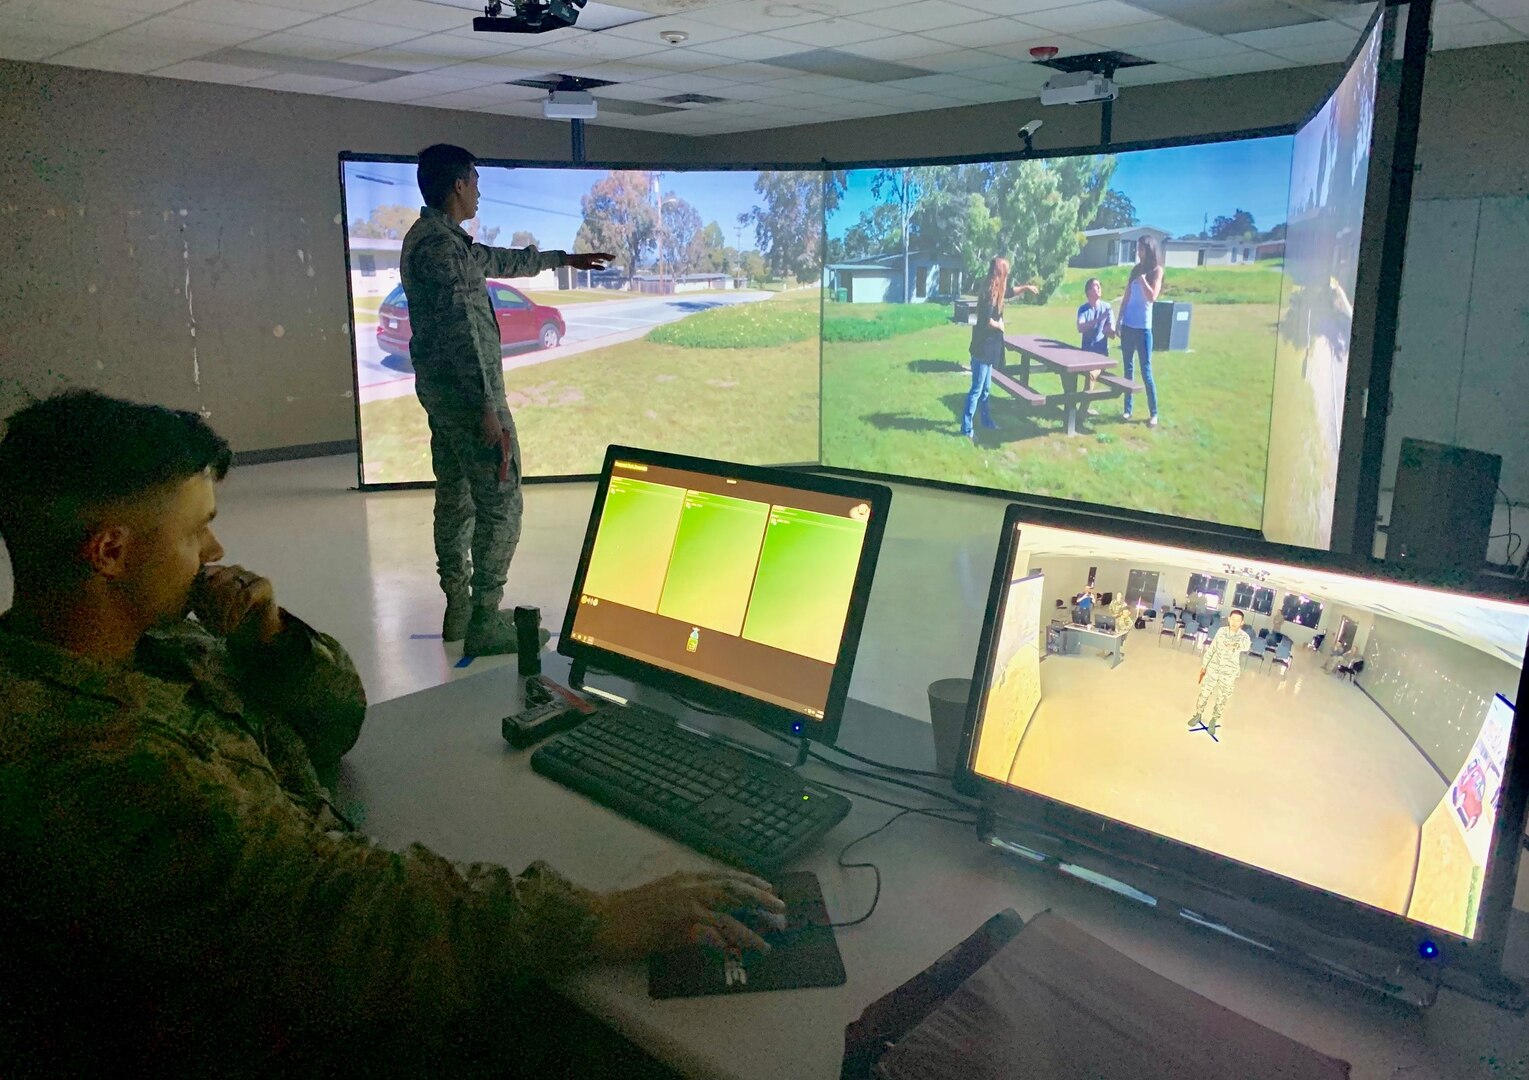 Airman 1st Class Valric Suyom, a recent graduate of the Security Forces apprentice course, participates in a use of force training scenario in the Multiple Interactive Learning Objectives, or MILO, simulator as Staff Sgt. James McKinney, 343rd Training Squadron instructor, guides the training at Joint Base San Antonio-Lackland May 29. The MILO system puts student in various interactive use of force training scenarios, including the potential application of deadly force, through the use of enhanced video screens.